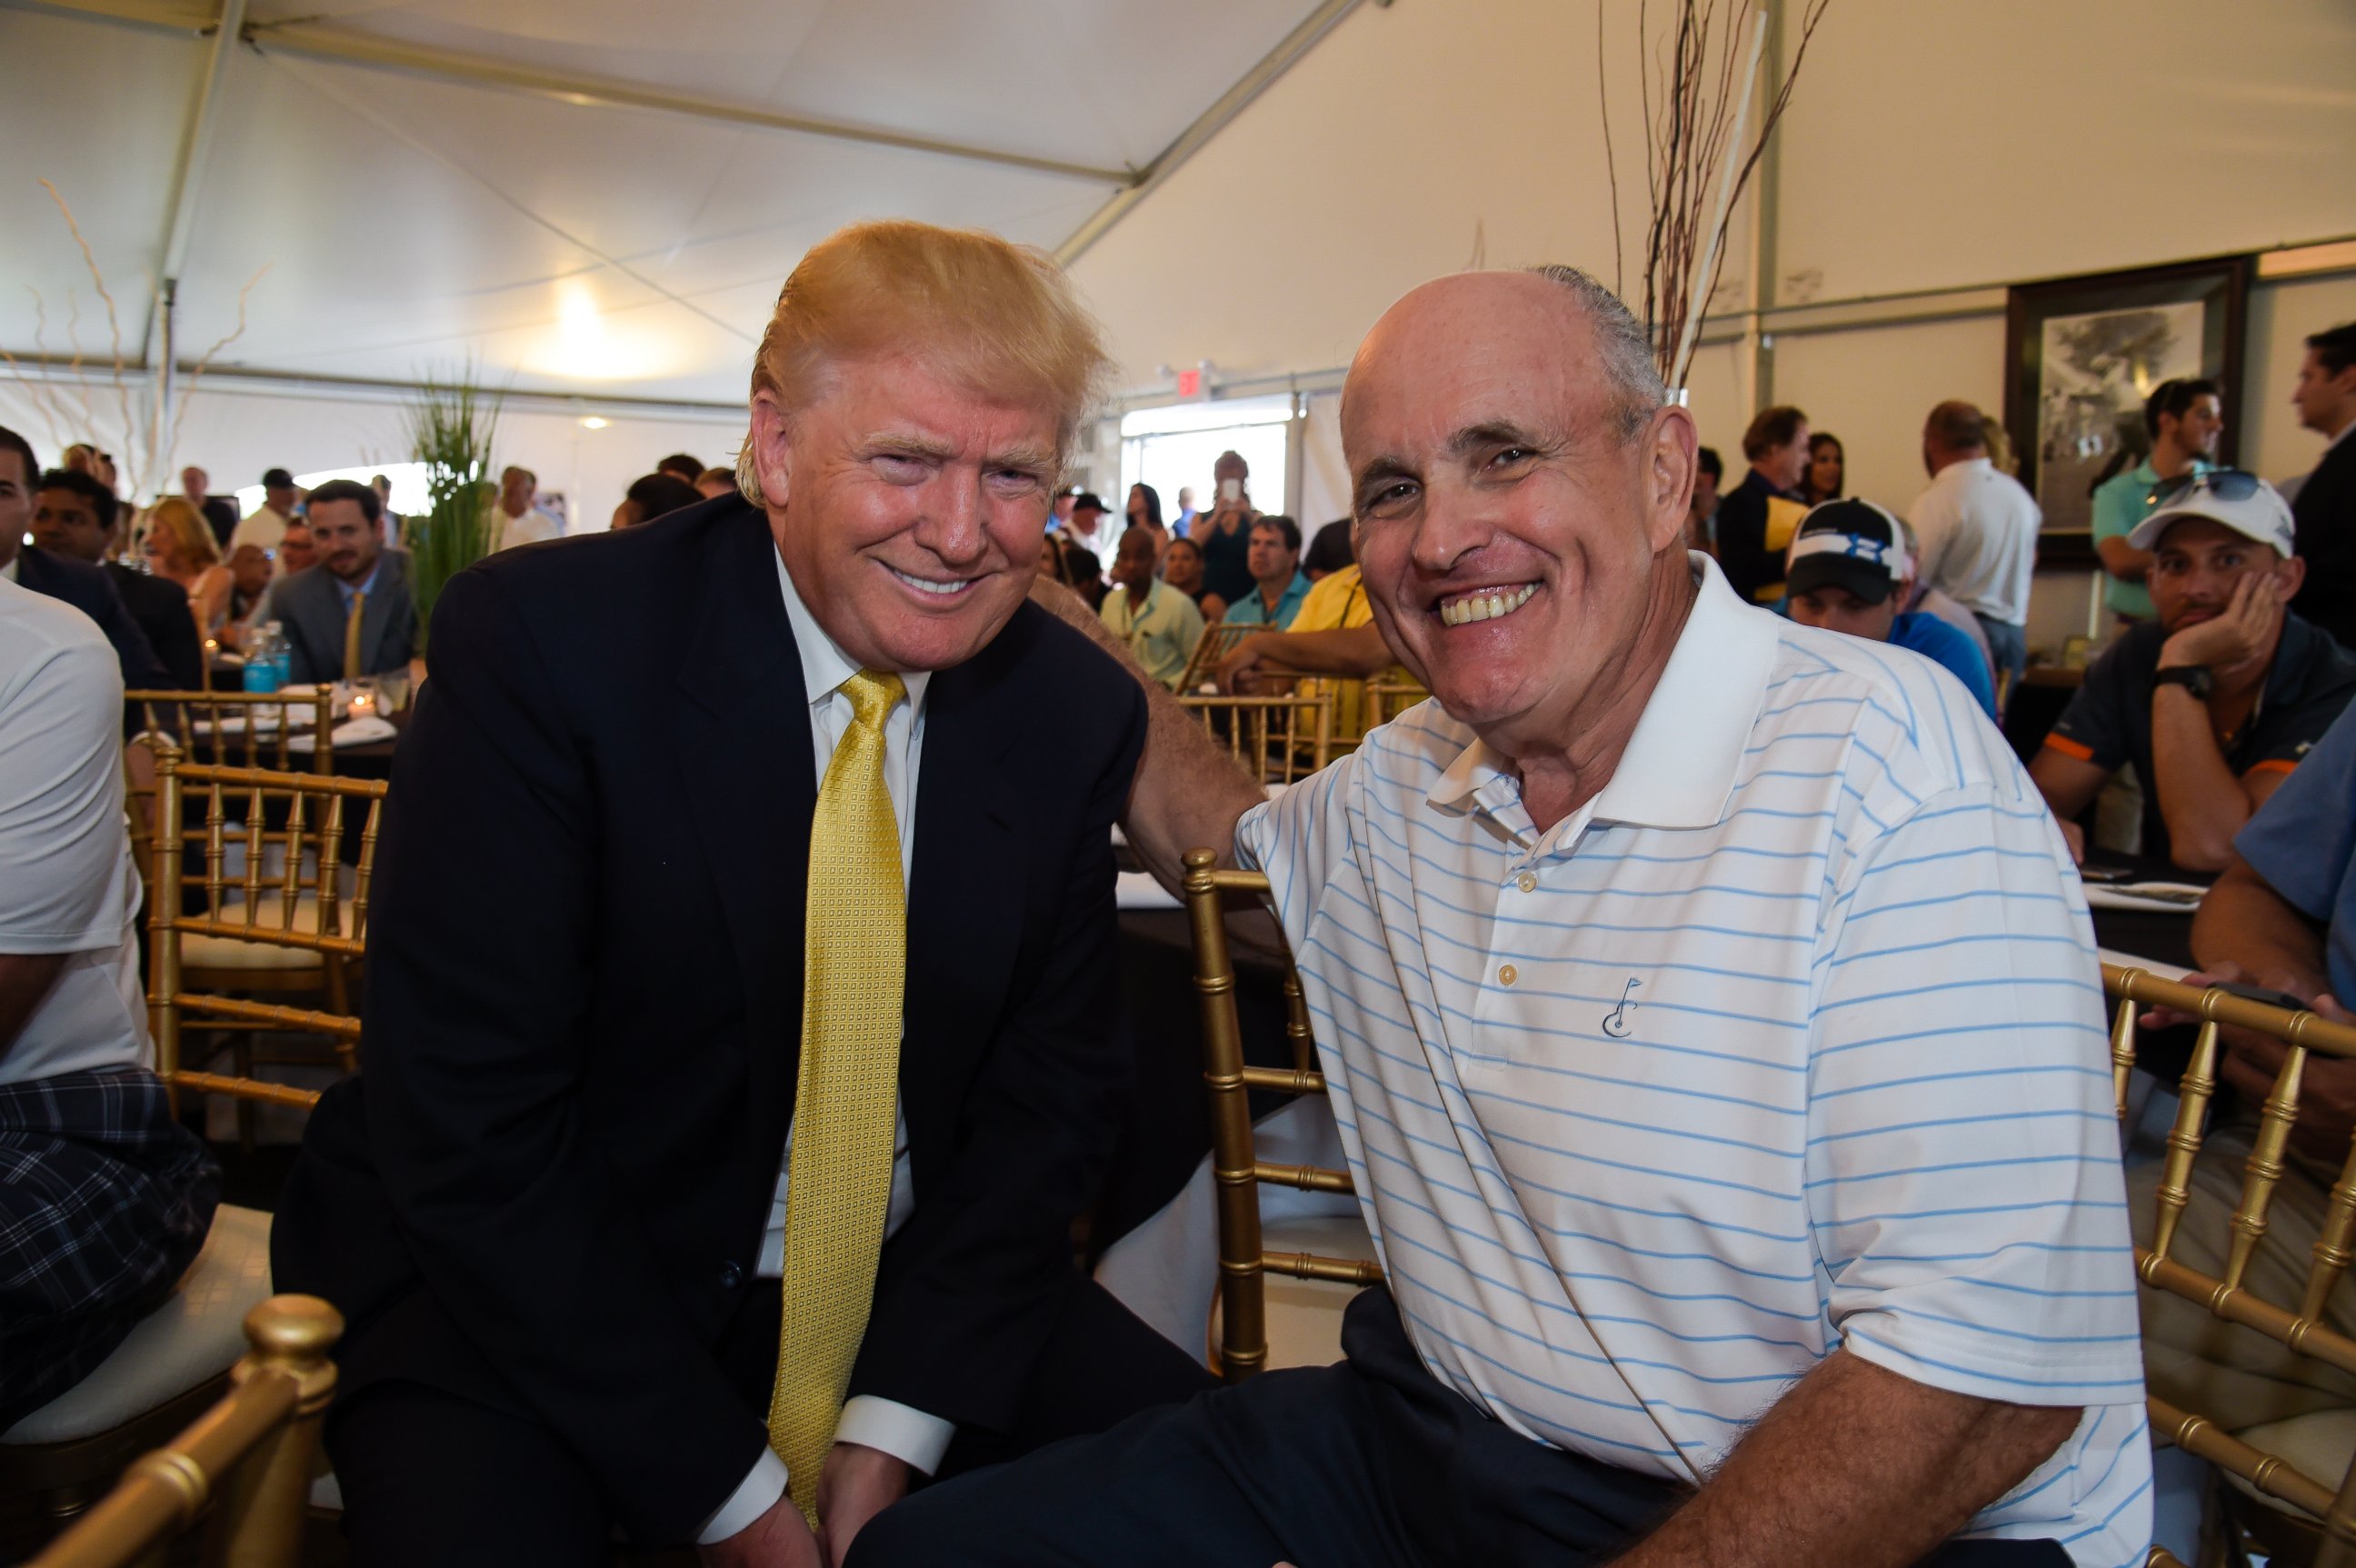 PHOTO: Donald Trump with Mayor Rudy Giuliani at the Yankees First Annual Golf Classic at Trump Golf Links at Ferry Point Golf Club in Bronx, N.Y. on July 6, 2015.   